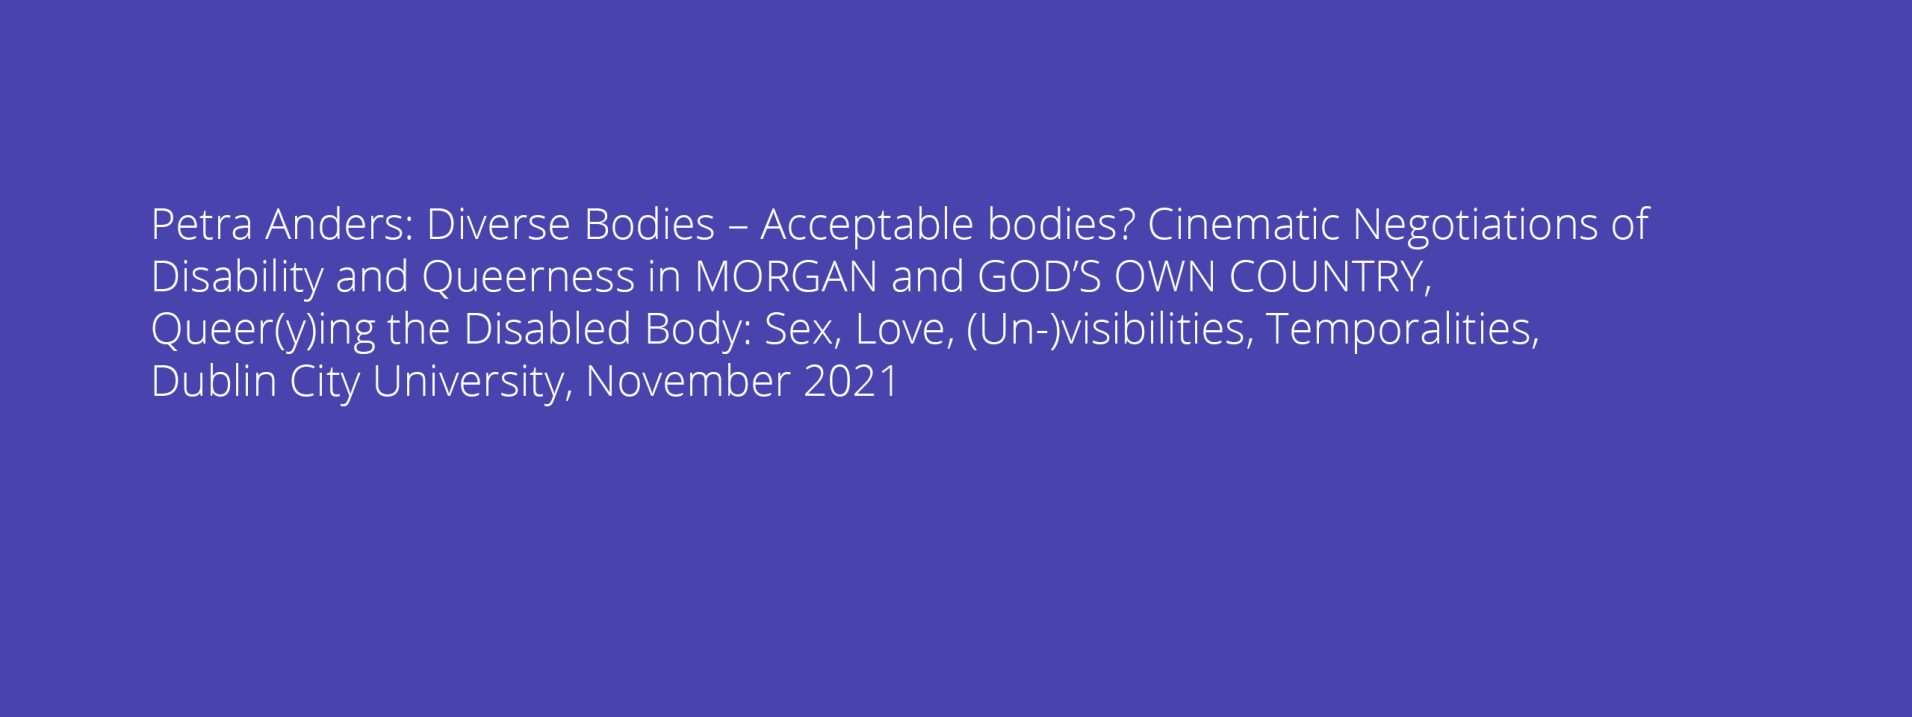 Petra Anders: Diverse Bodies – Acceptable bodies? Cinematic Negotiations of Disability and Queerness in MORGAN and GOD’S OWN COUNTRY, Queer(y)ing the Disabled Body: Sex, Love, (Un-)visibilities, Temporalities, Dublin City University, November 2021